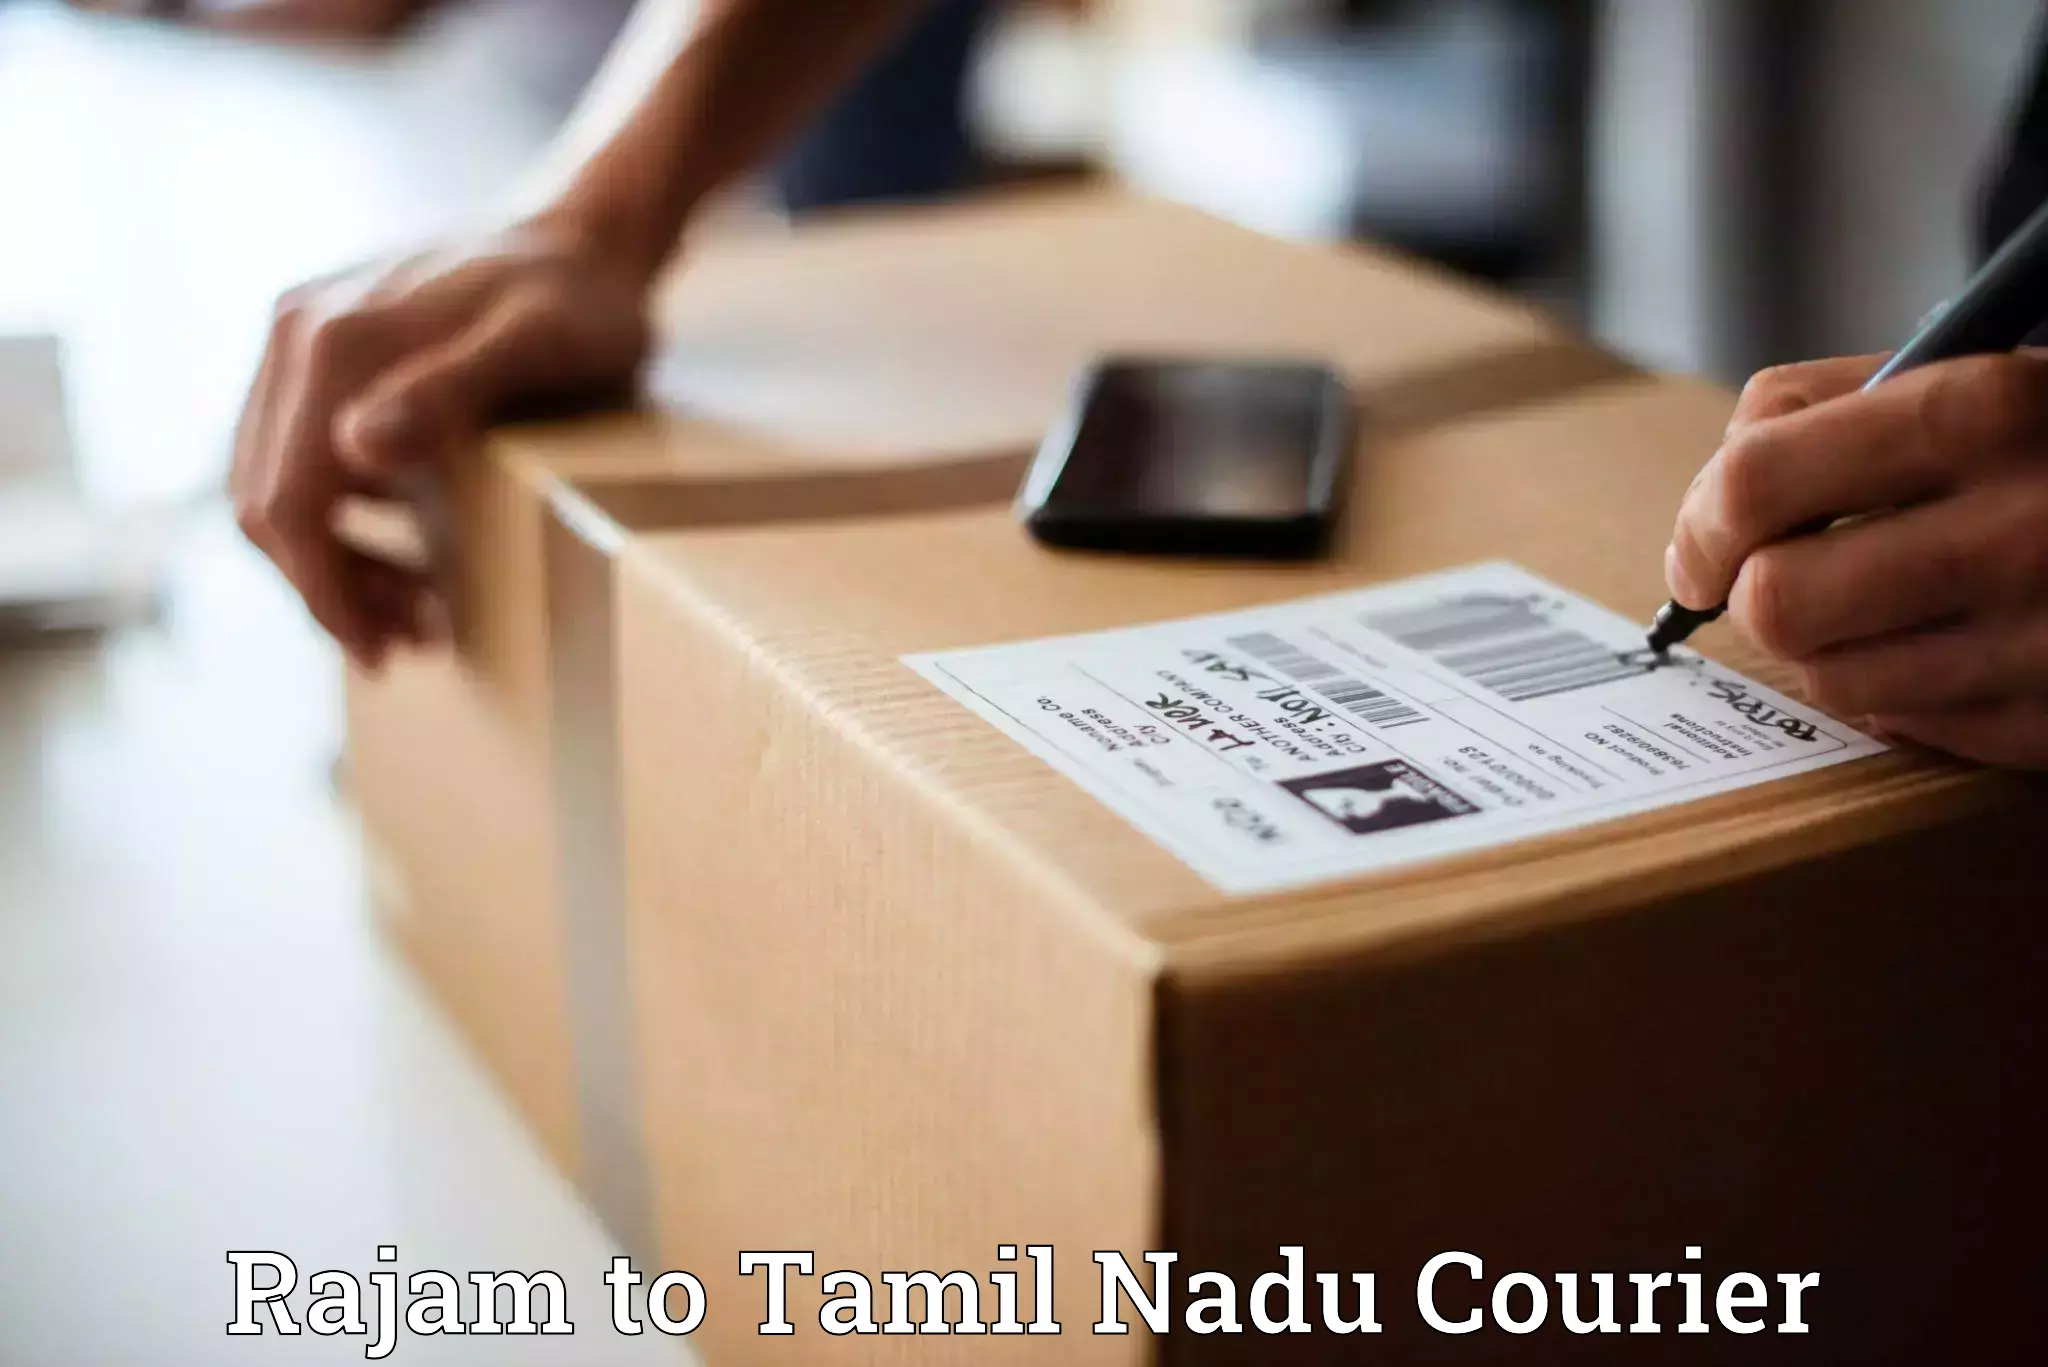 Courier service partnerships Rajam to Cheyyar